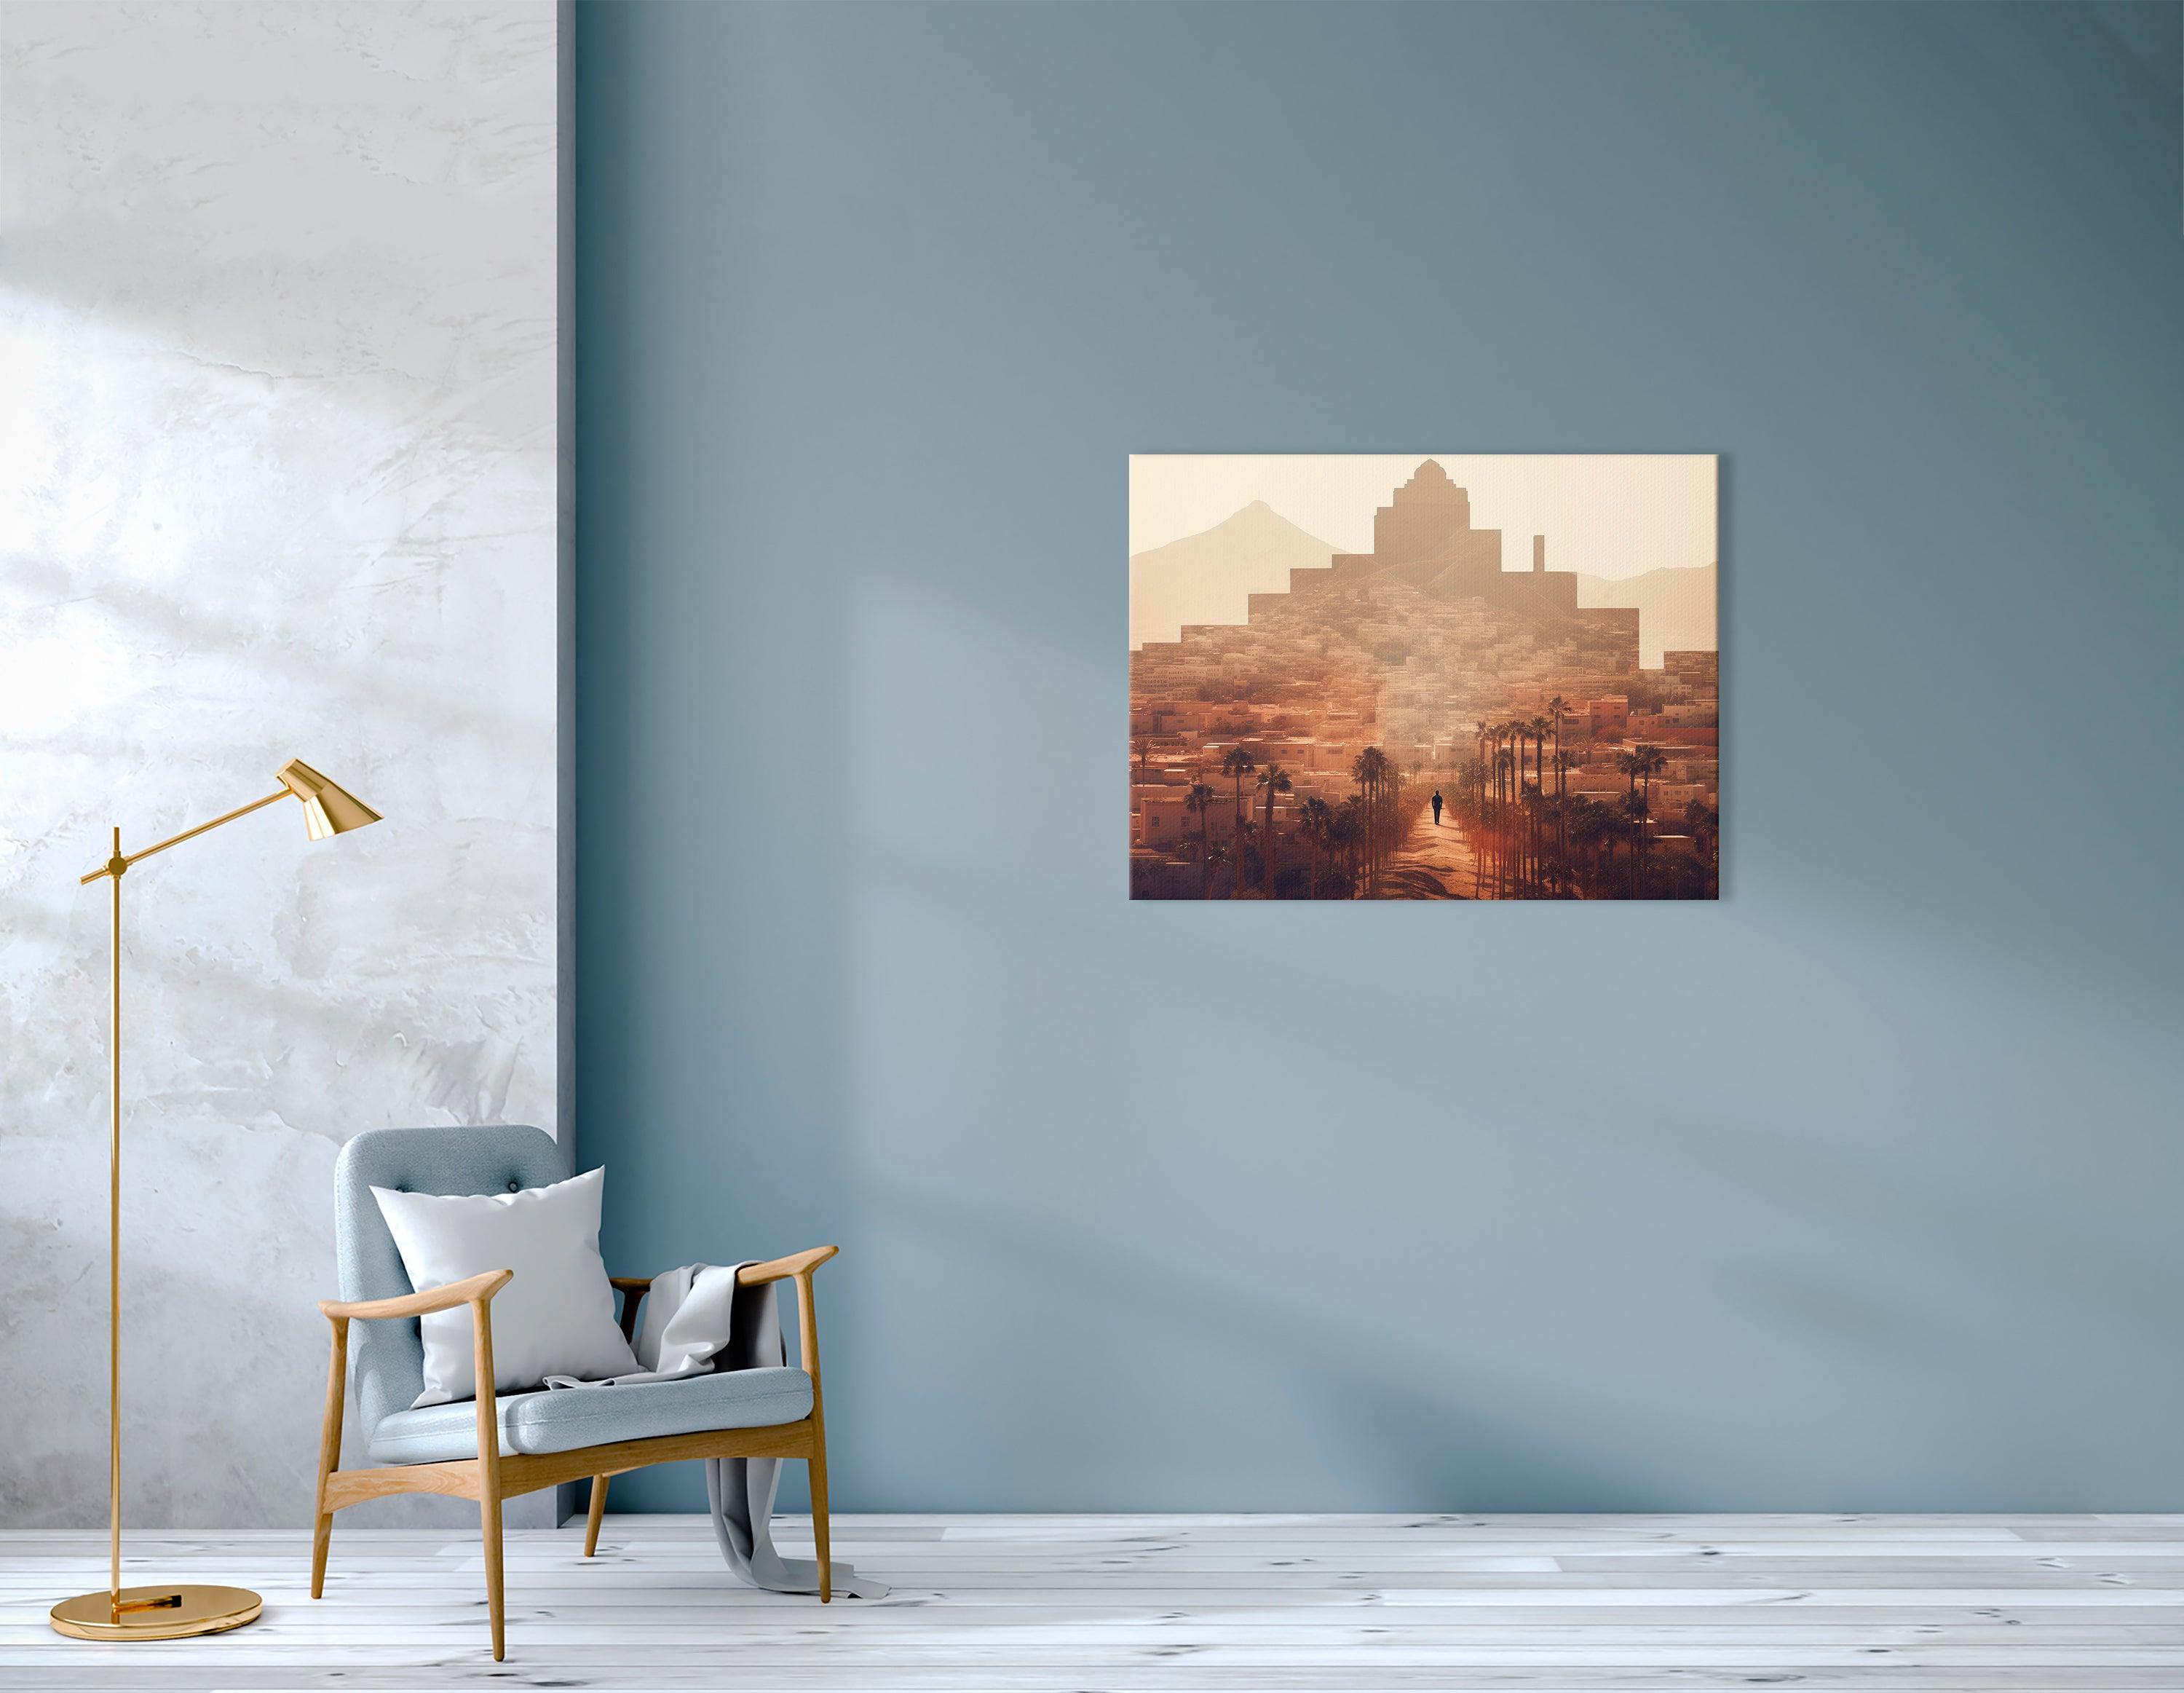 Modern City Meets Ancient Wonders in Double Exposure Technique - Canvas Print - Artoholica Ready to Hang Canvas Print